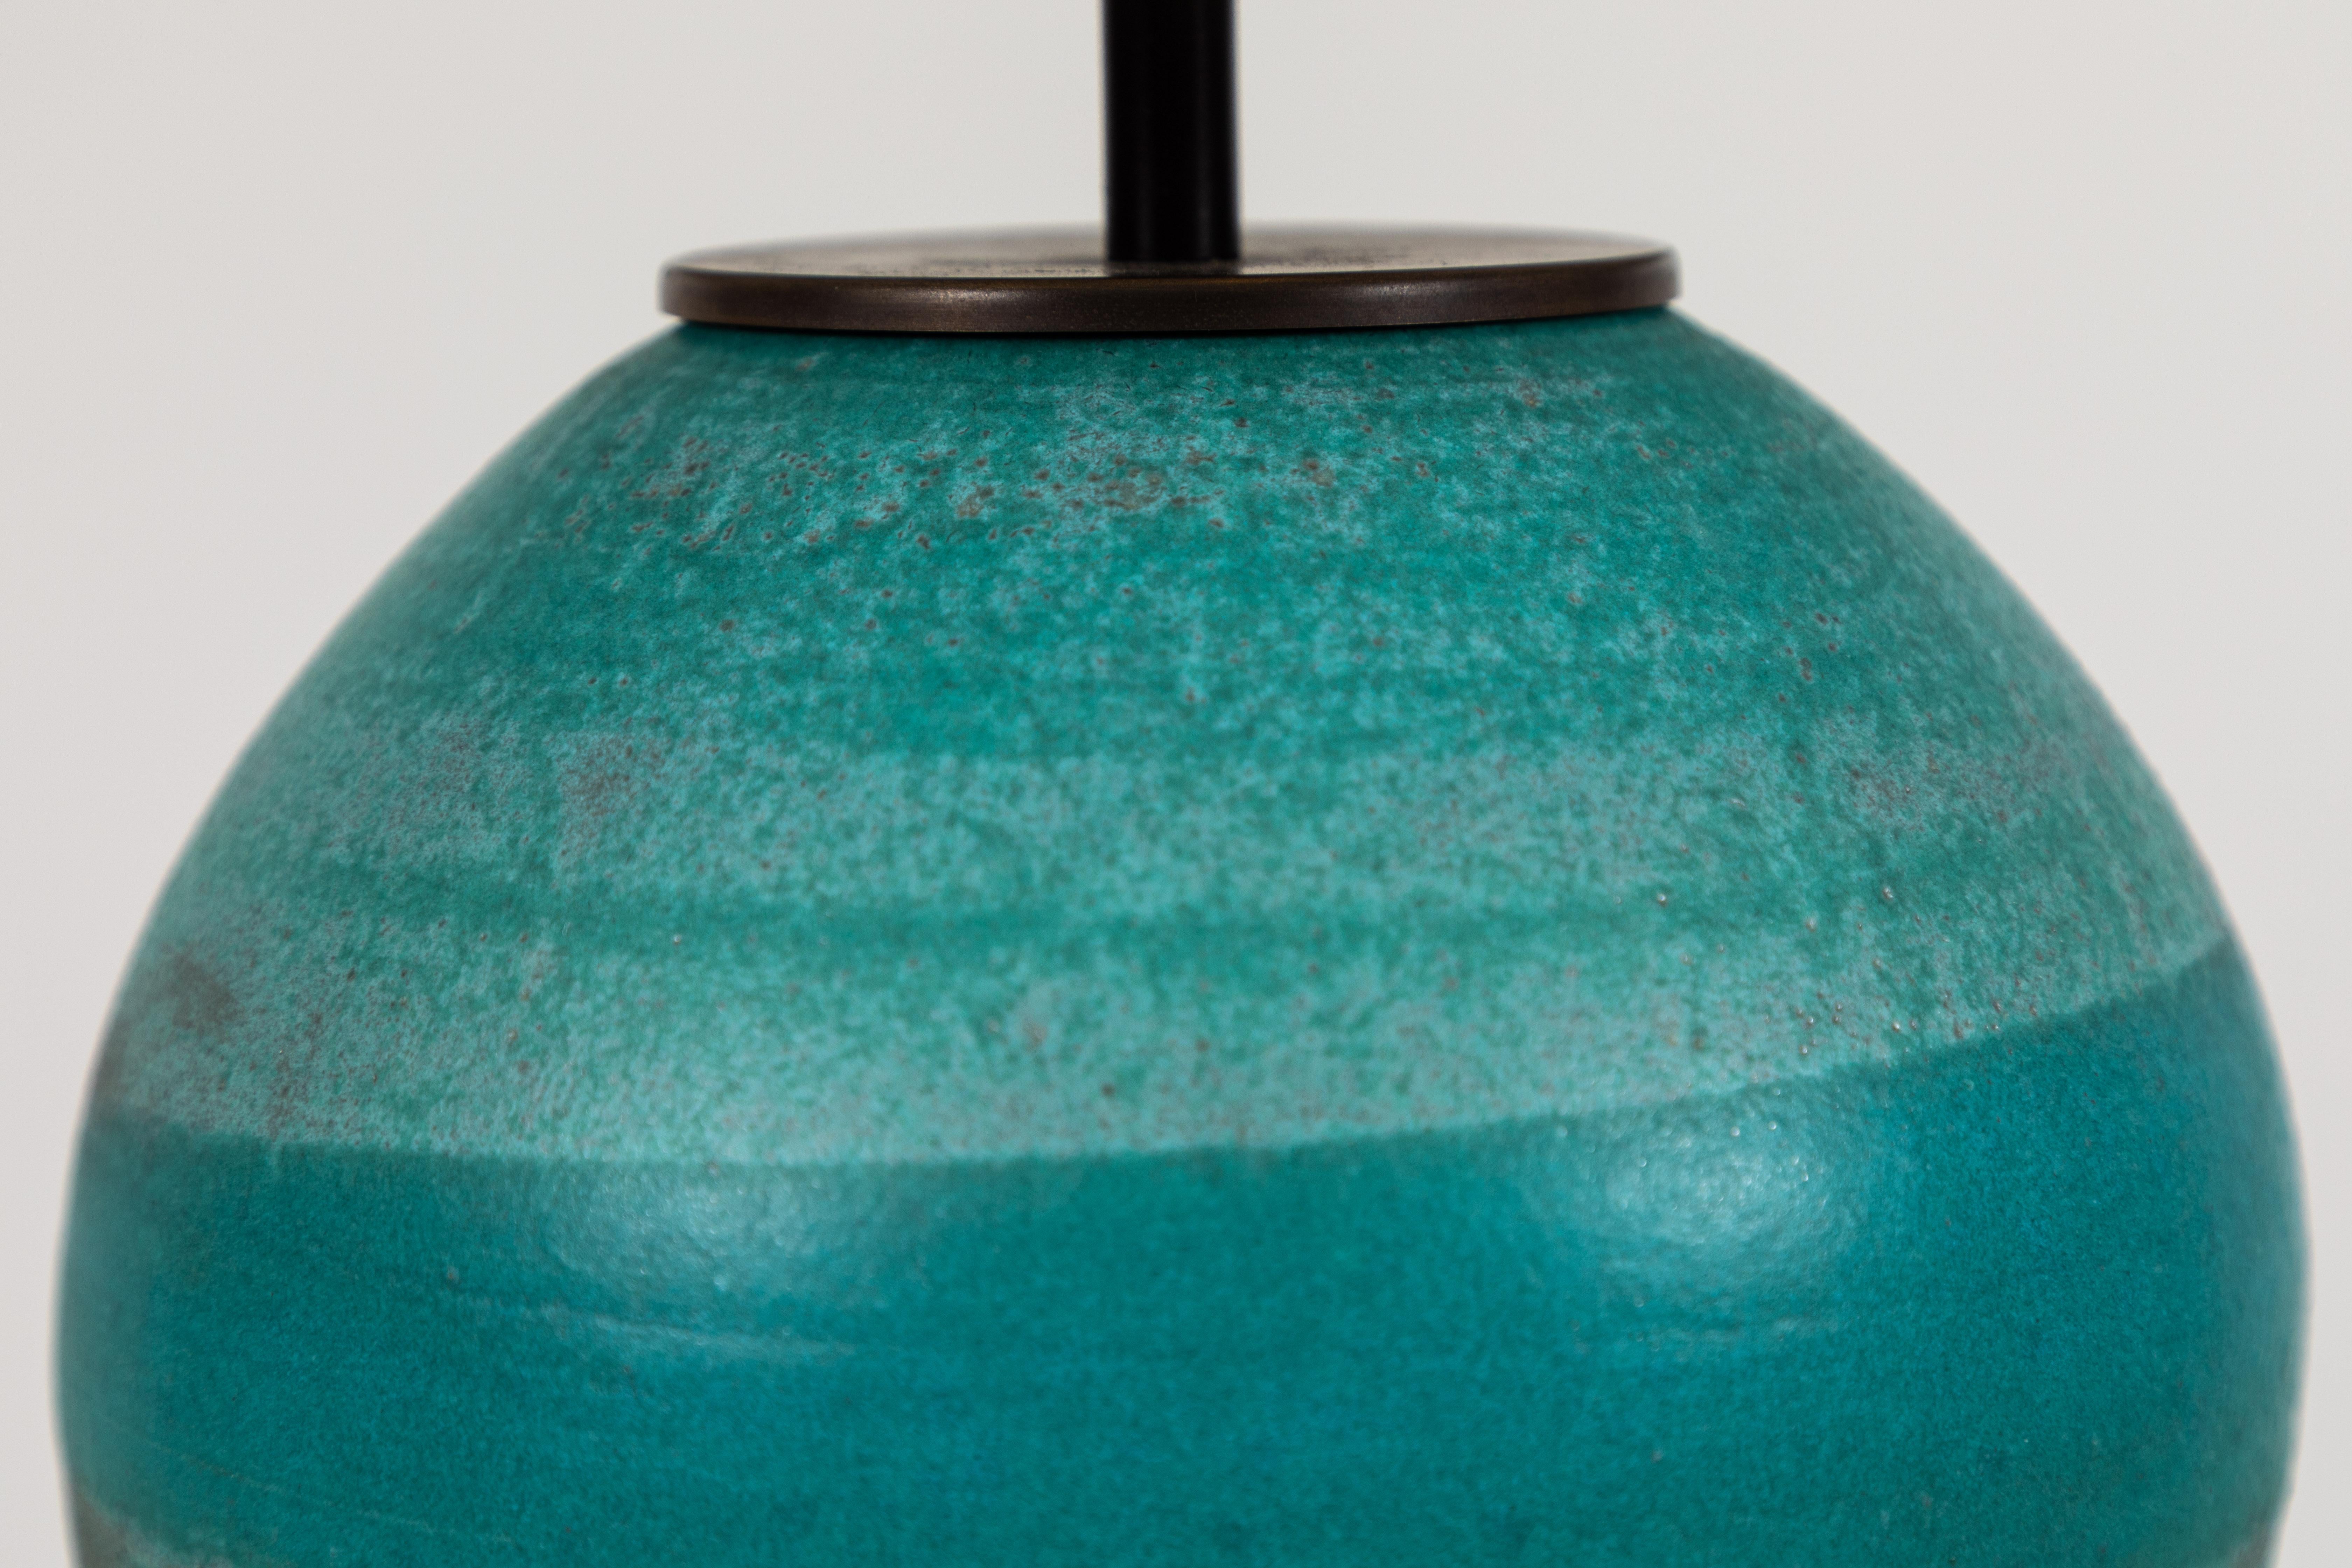 American Turquoise Ceramic Lamp by Victoria Morris for Lawson-Fenning